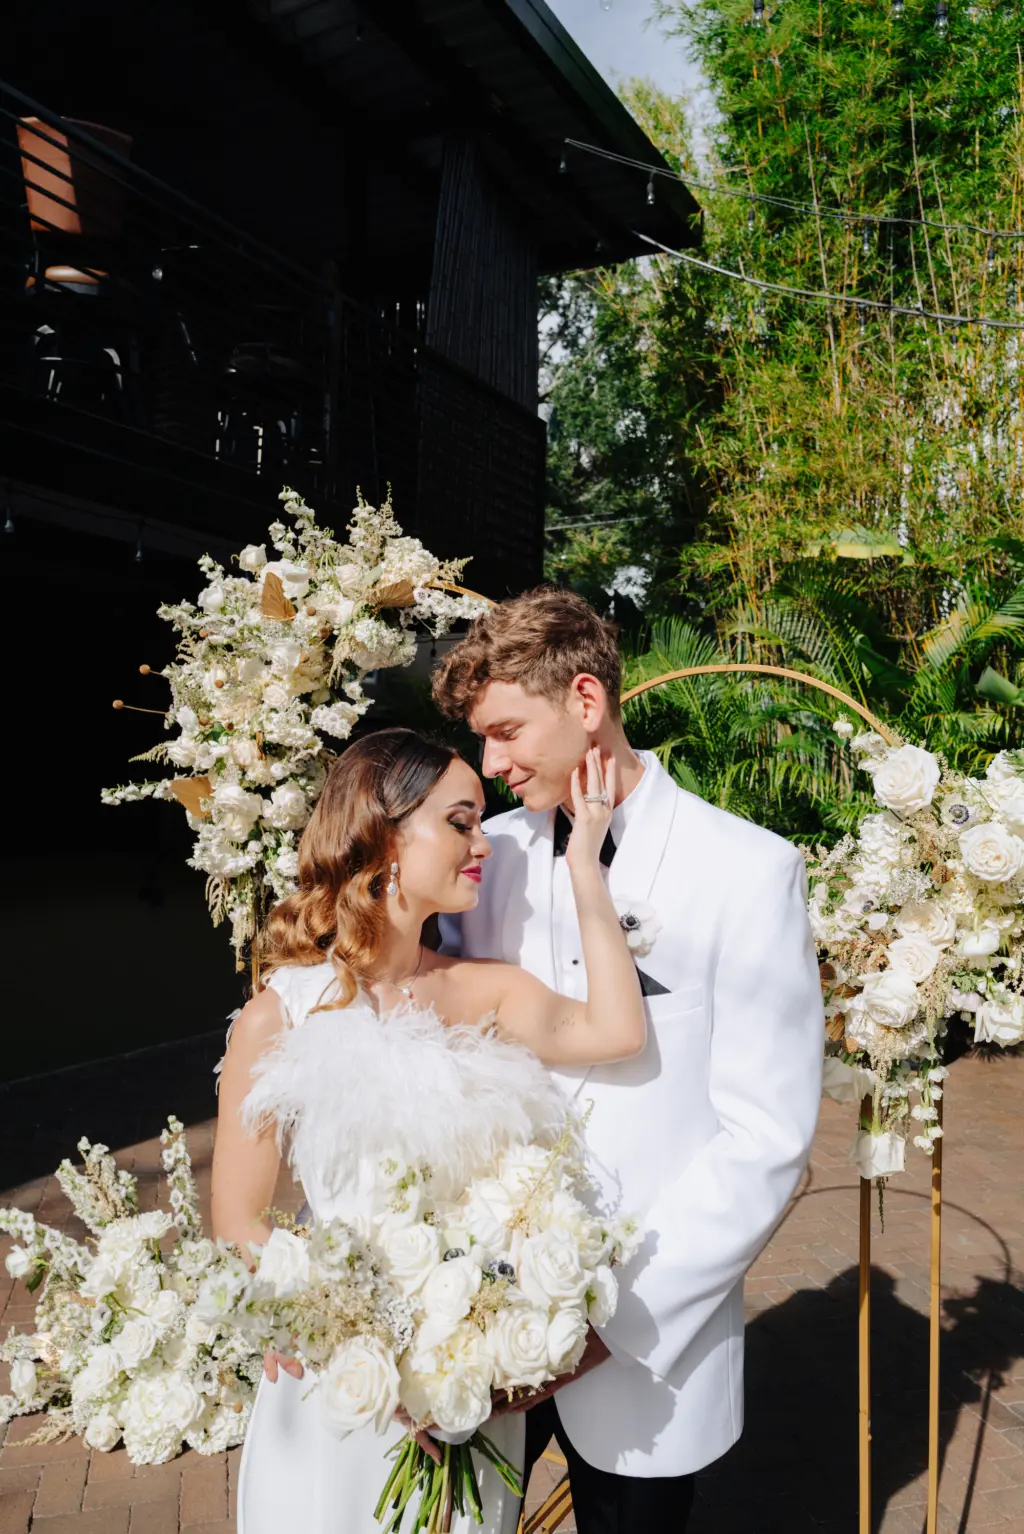 Modern White Wedding Ceremony Flowers Ideas with Gold Arch | Tampa Florist Marigold Flower Co | Photographer Mcneile Photography | Videographer Sabrina Autumn Photography | Planner Kelci Leigh Events